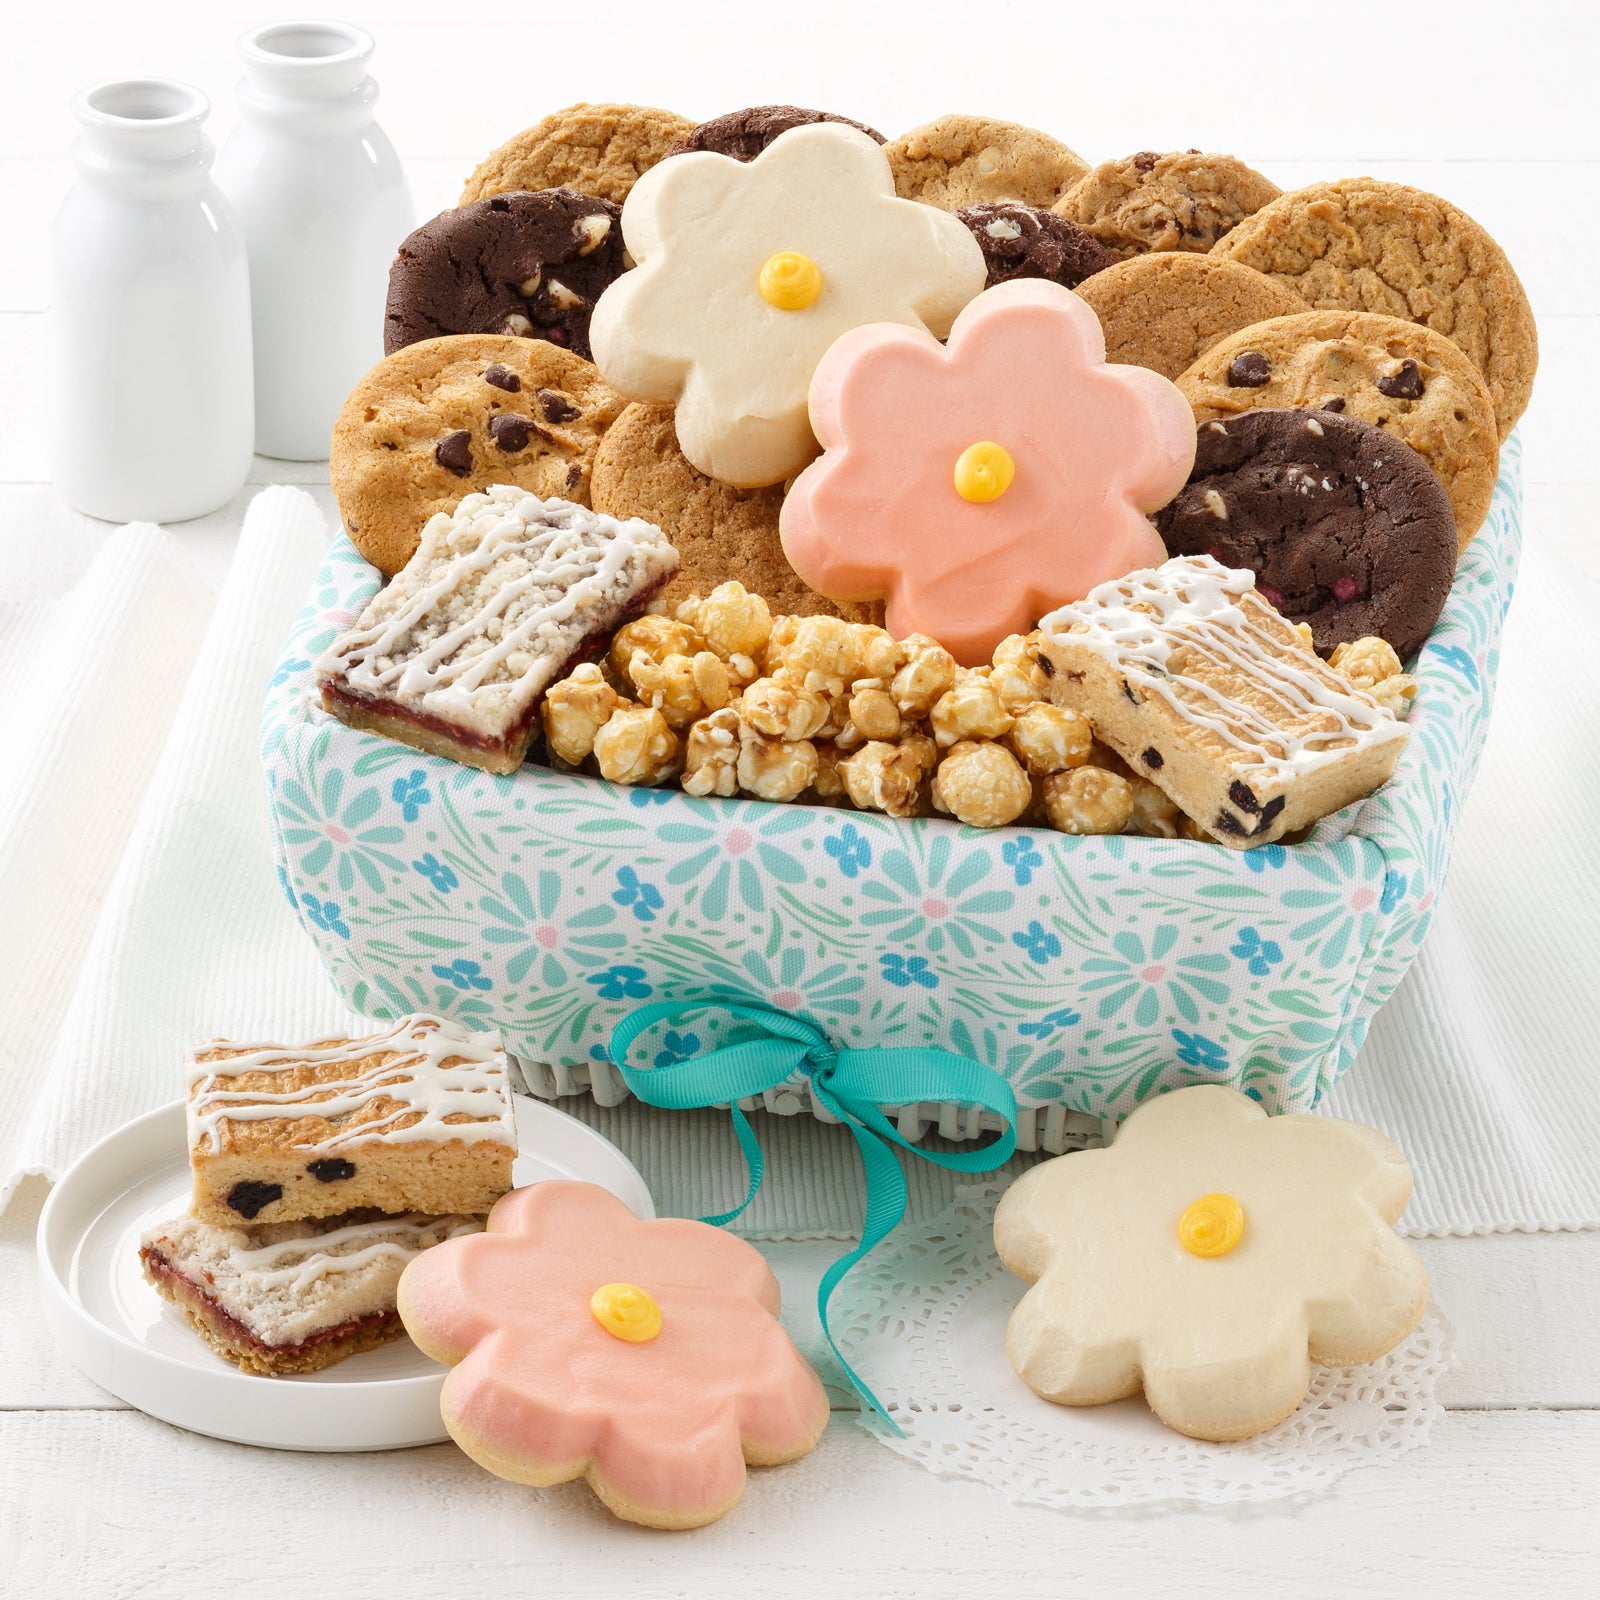 A spring themed gift basket filled with an assortment of original cookies, fruit bars, four frosted cookies, and popcorn